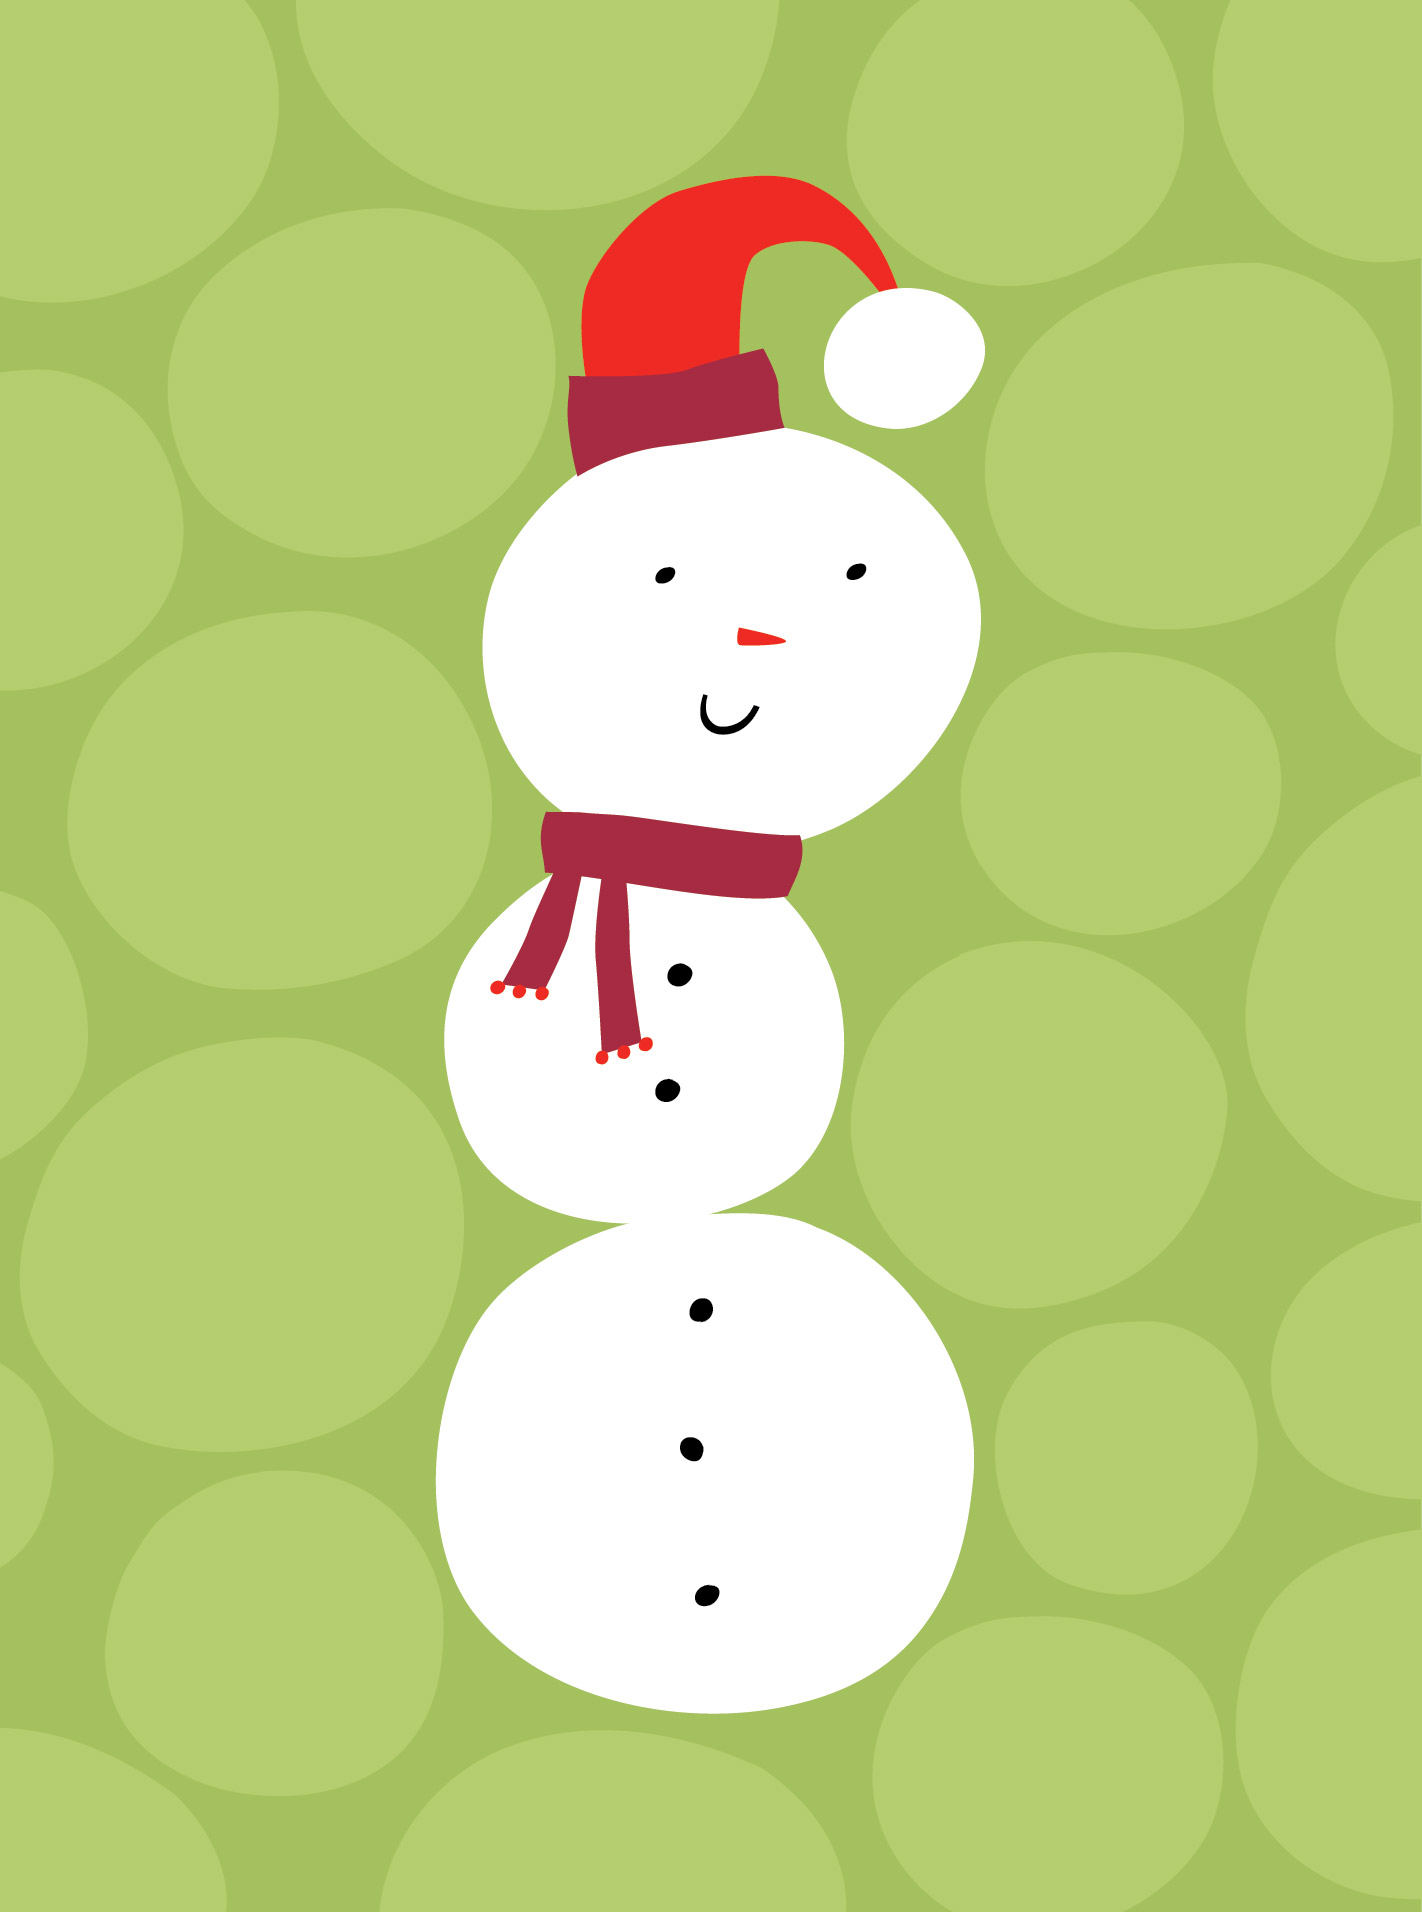 Cute Snowman Illustration for Great Arrow Graphics